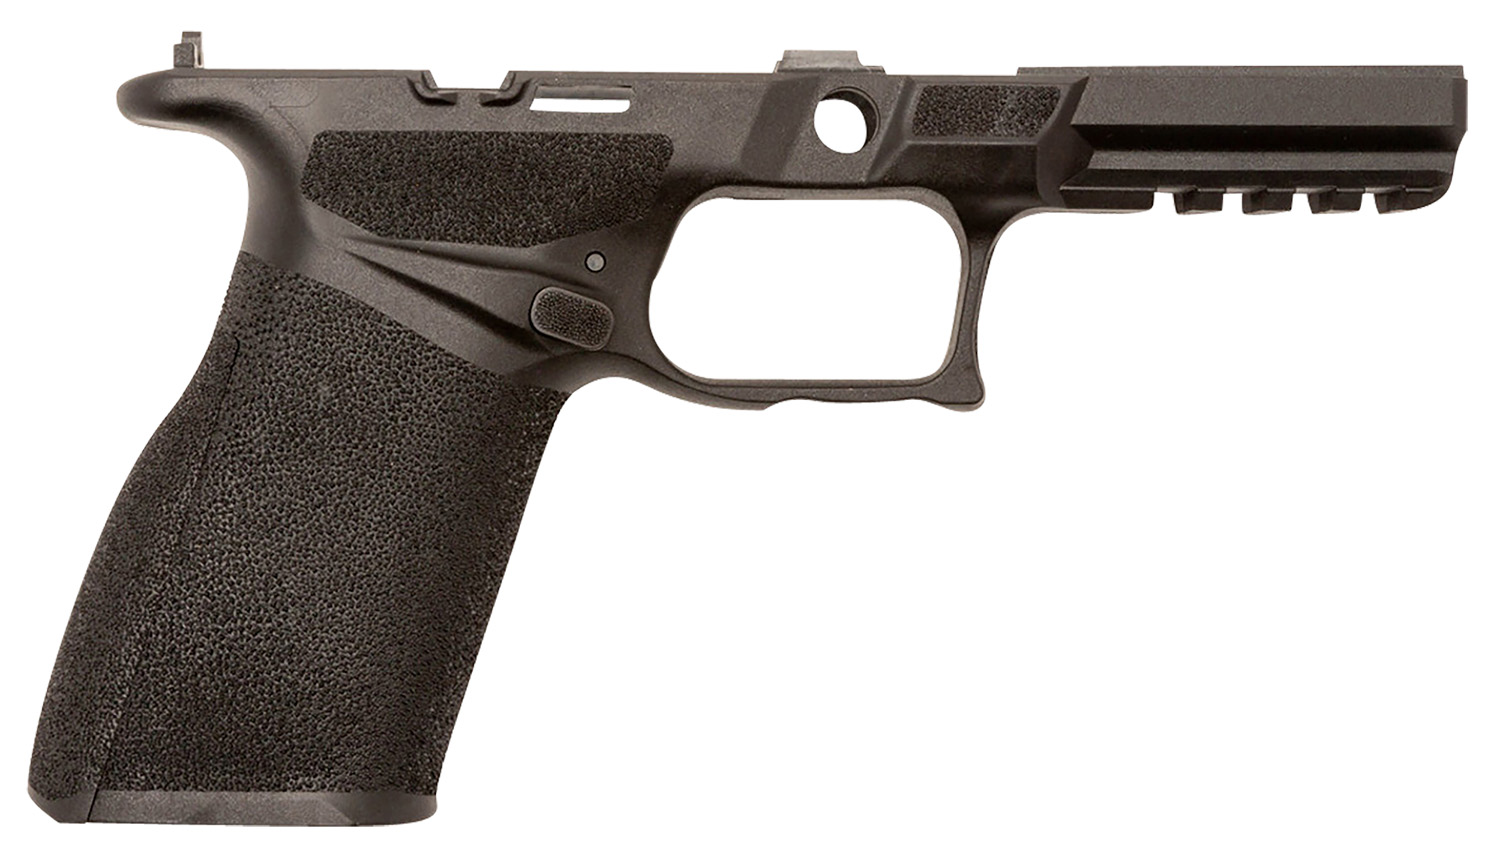 Springfield Armory Ec1003HTRET Echelon Grip Module Large, Aggressive Texture, Black Polymer, Ambi Mag Release, Includes